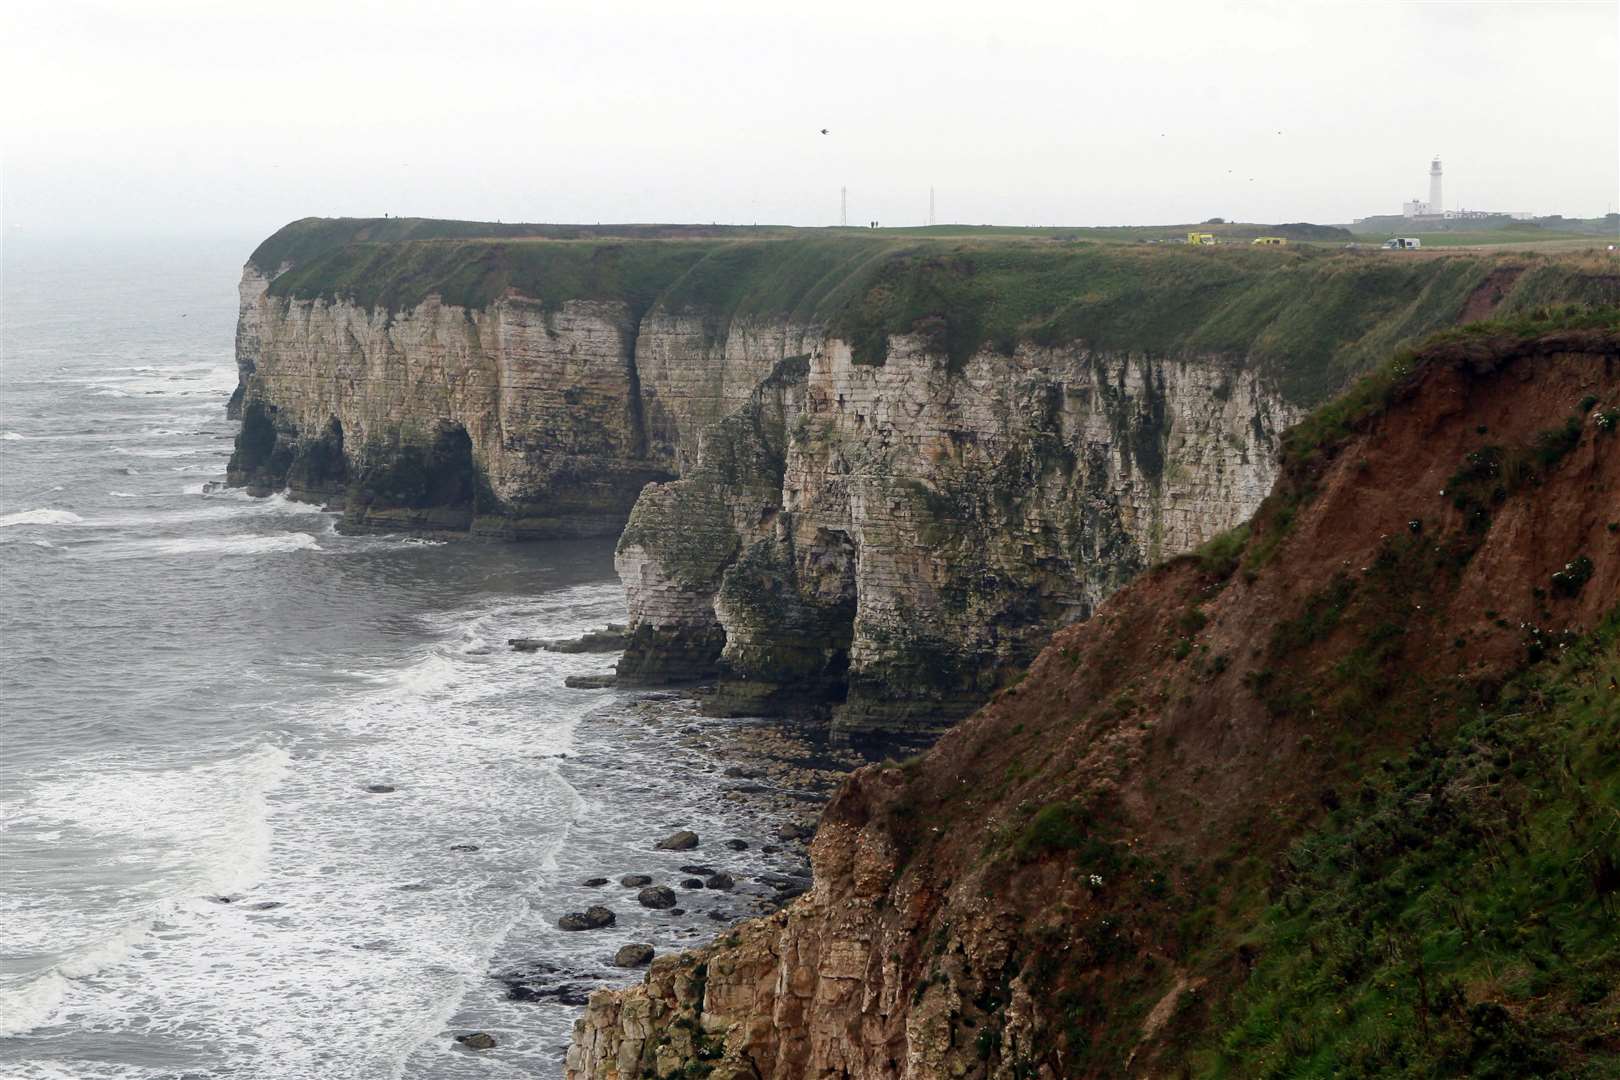 The scene of the helicopter crash off the coast of Flamborough Head. Picture: rossparry.co.uk/Steven Schofield